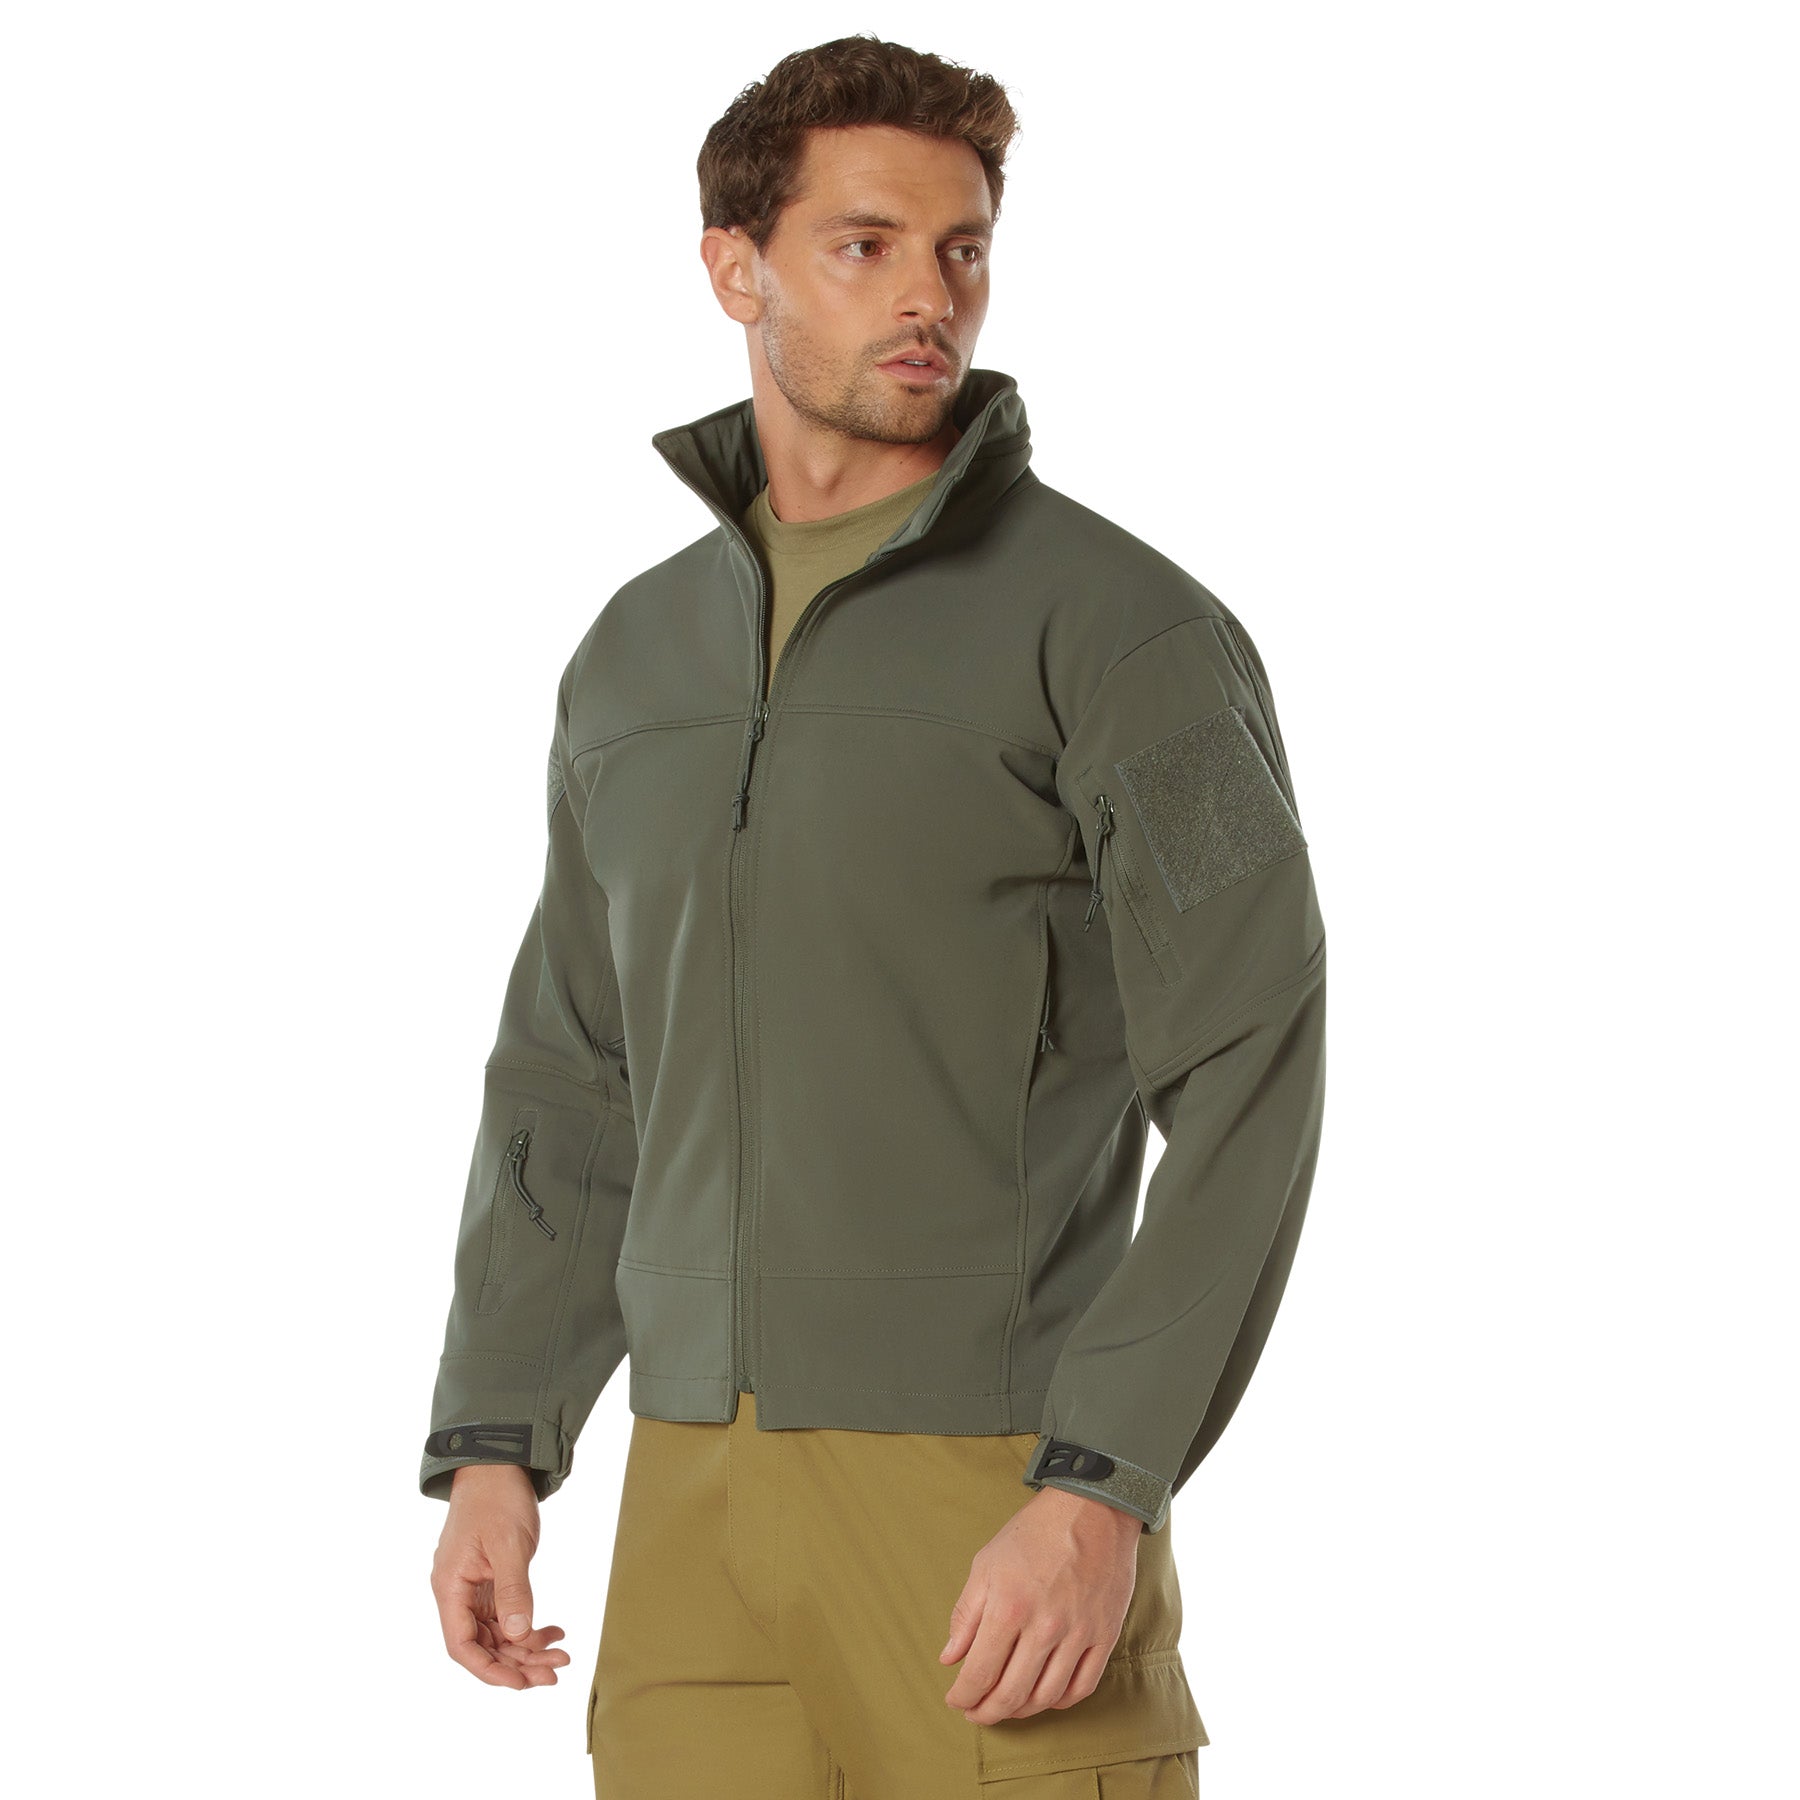 Poly Covert Spec Ops Lightweight Soft Shell Jackets Olive Drab